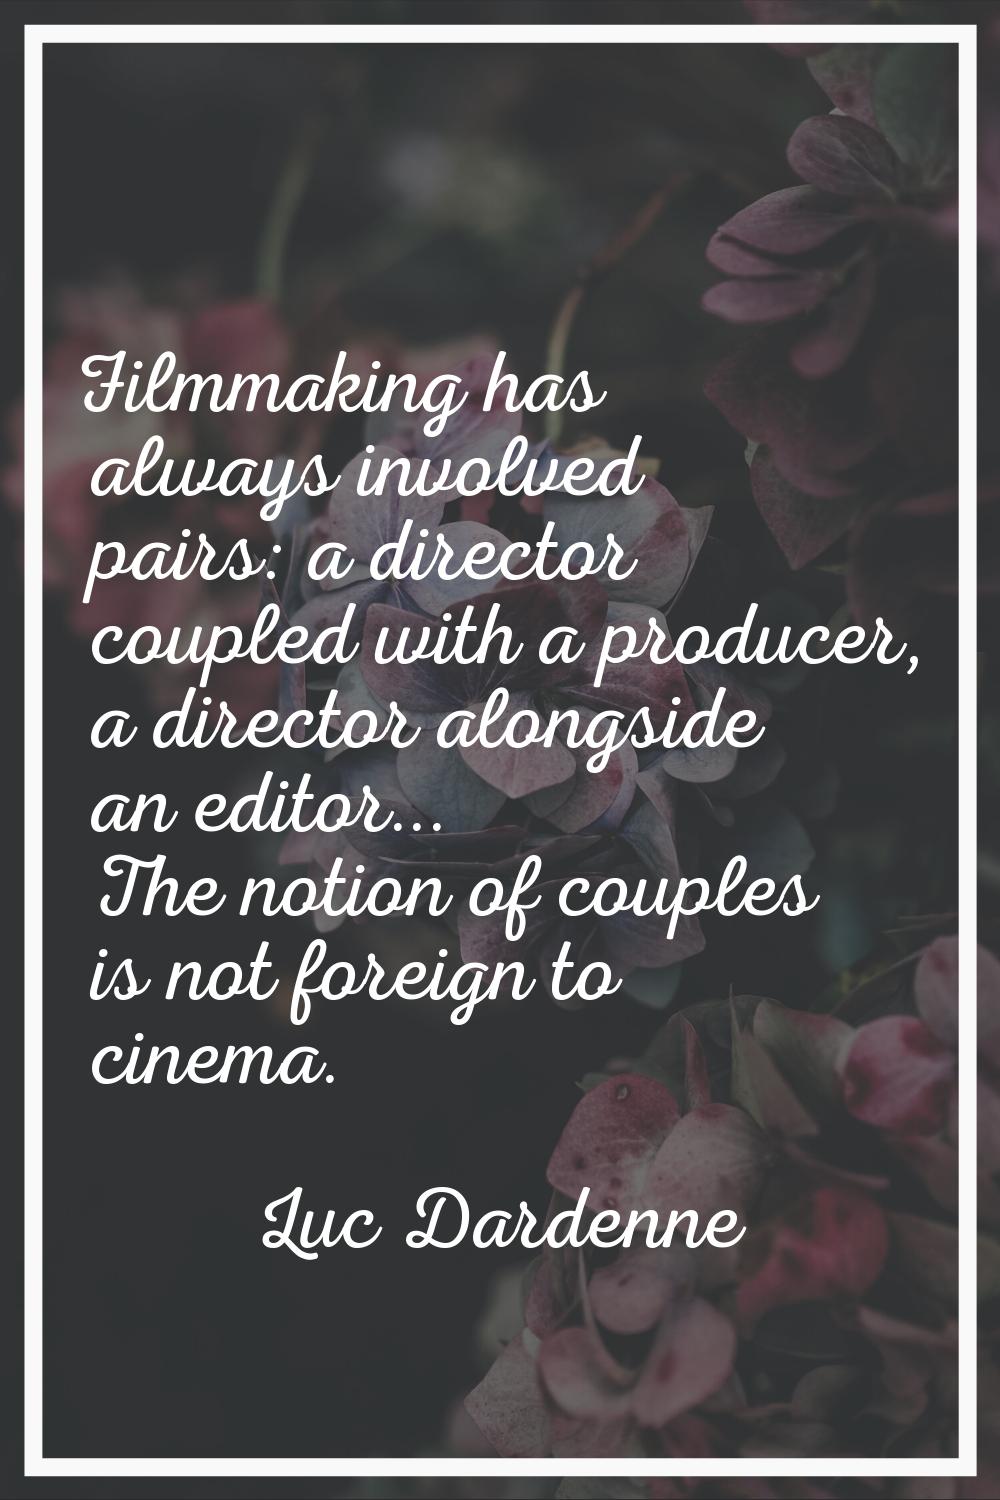 Filmmaking has always involved pairs: a director coupled with a producer, a director alongside an e